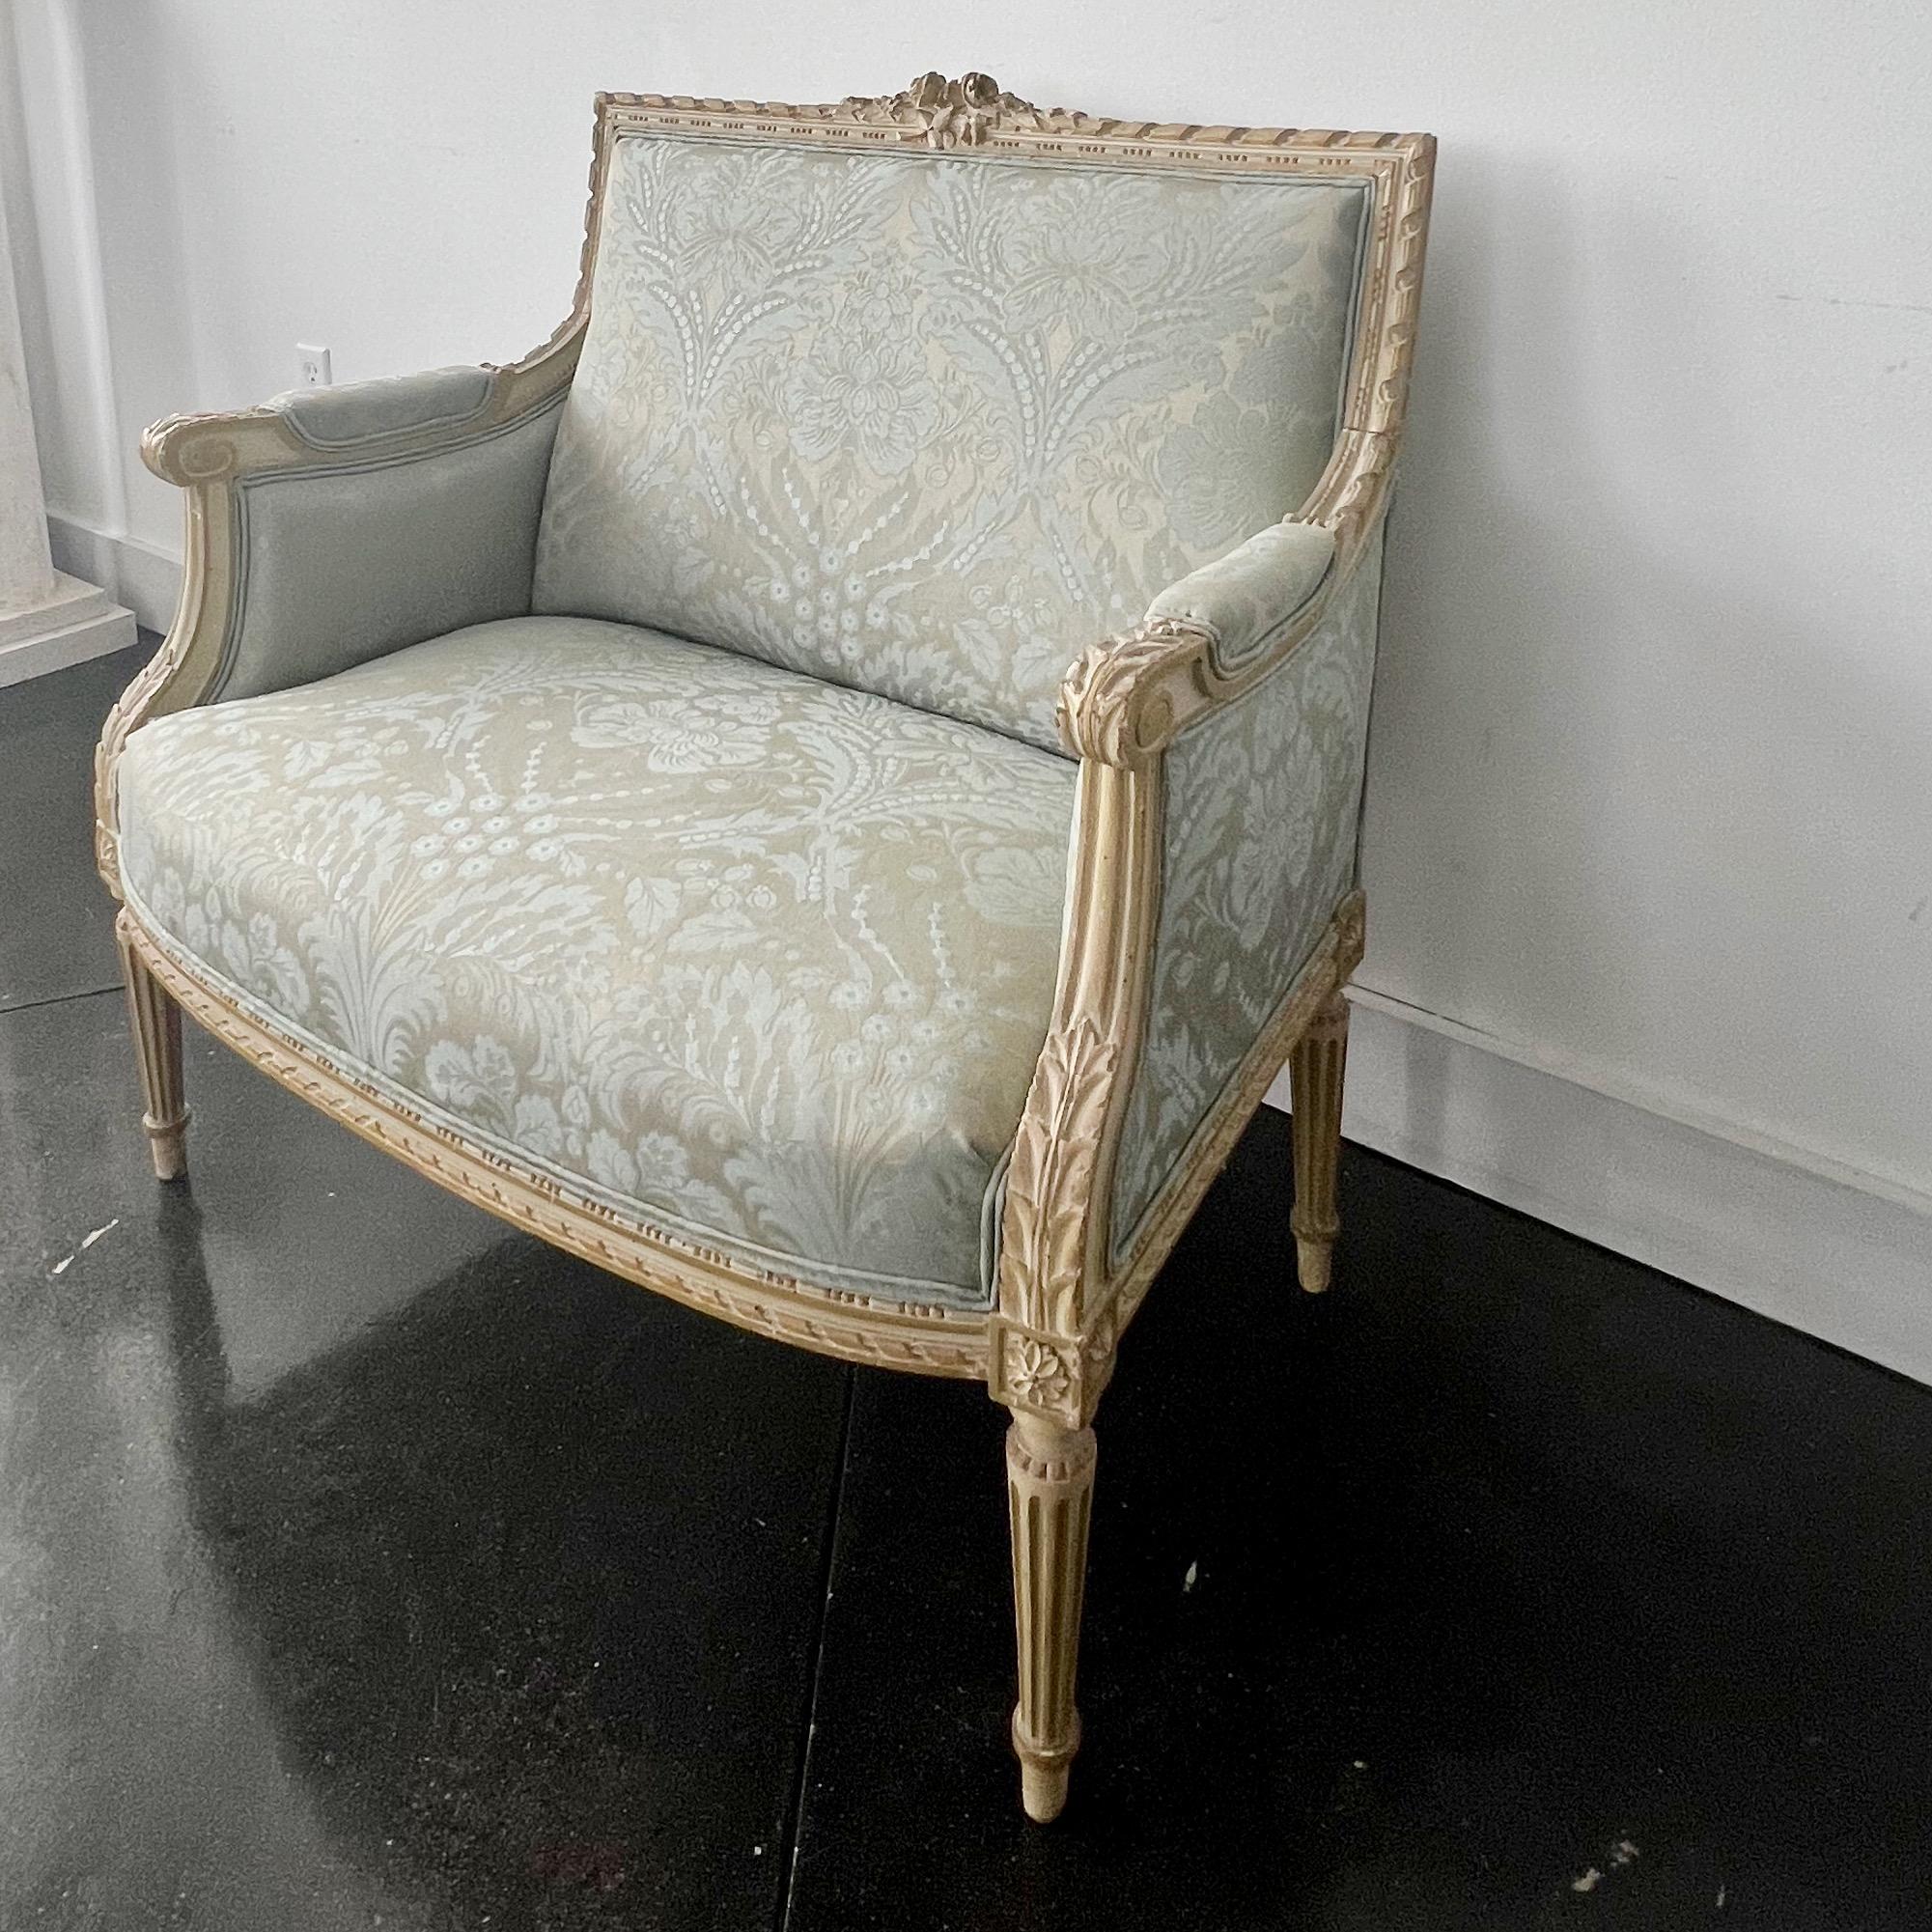 19th Century French Louis XVI Style Oversized Bergere Marquise Armchair For Sale 2